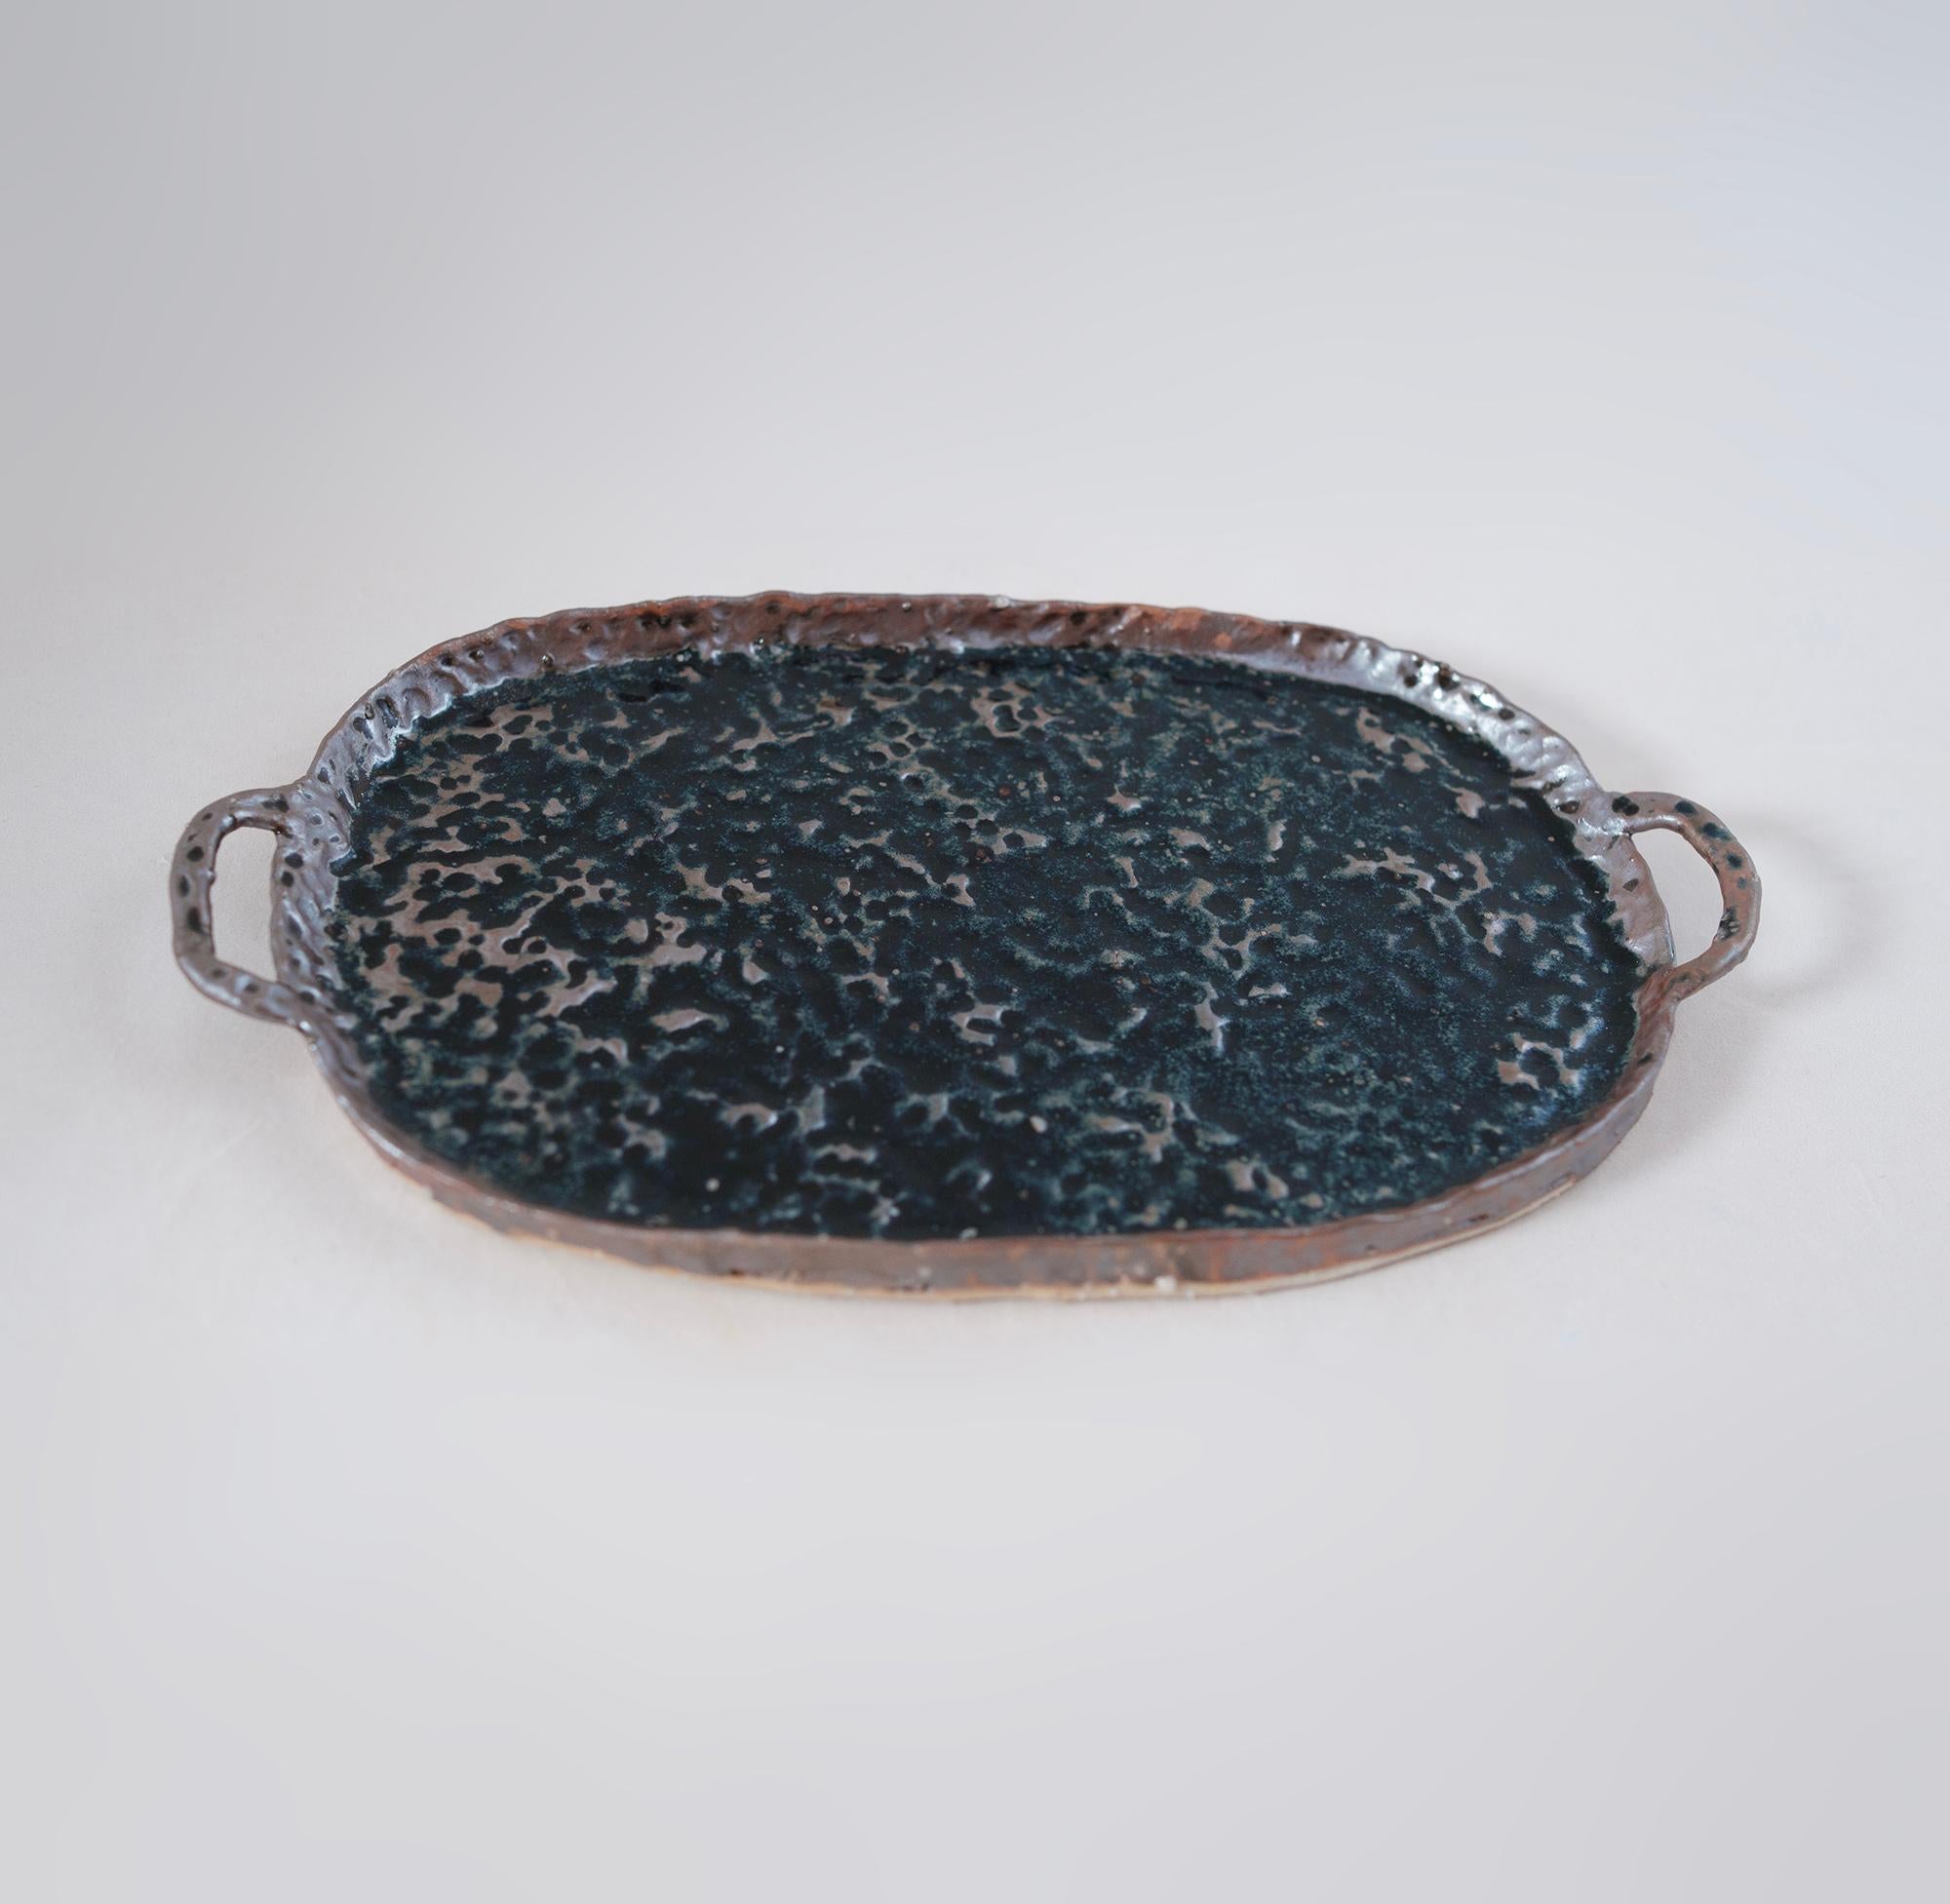 Serving tray made with local clay from Shigaraki, one of the six ancient kiln sites in Japan. Shigaraki is known for the special qualities of their clay. This sandy clay comes from the bed of Lake Biwa which is over 4 million years old. The clay has